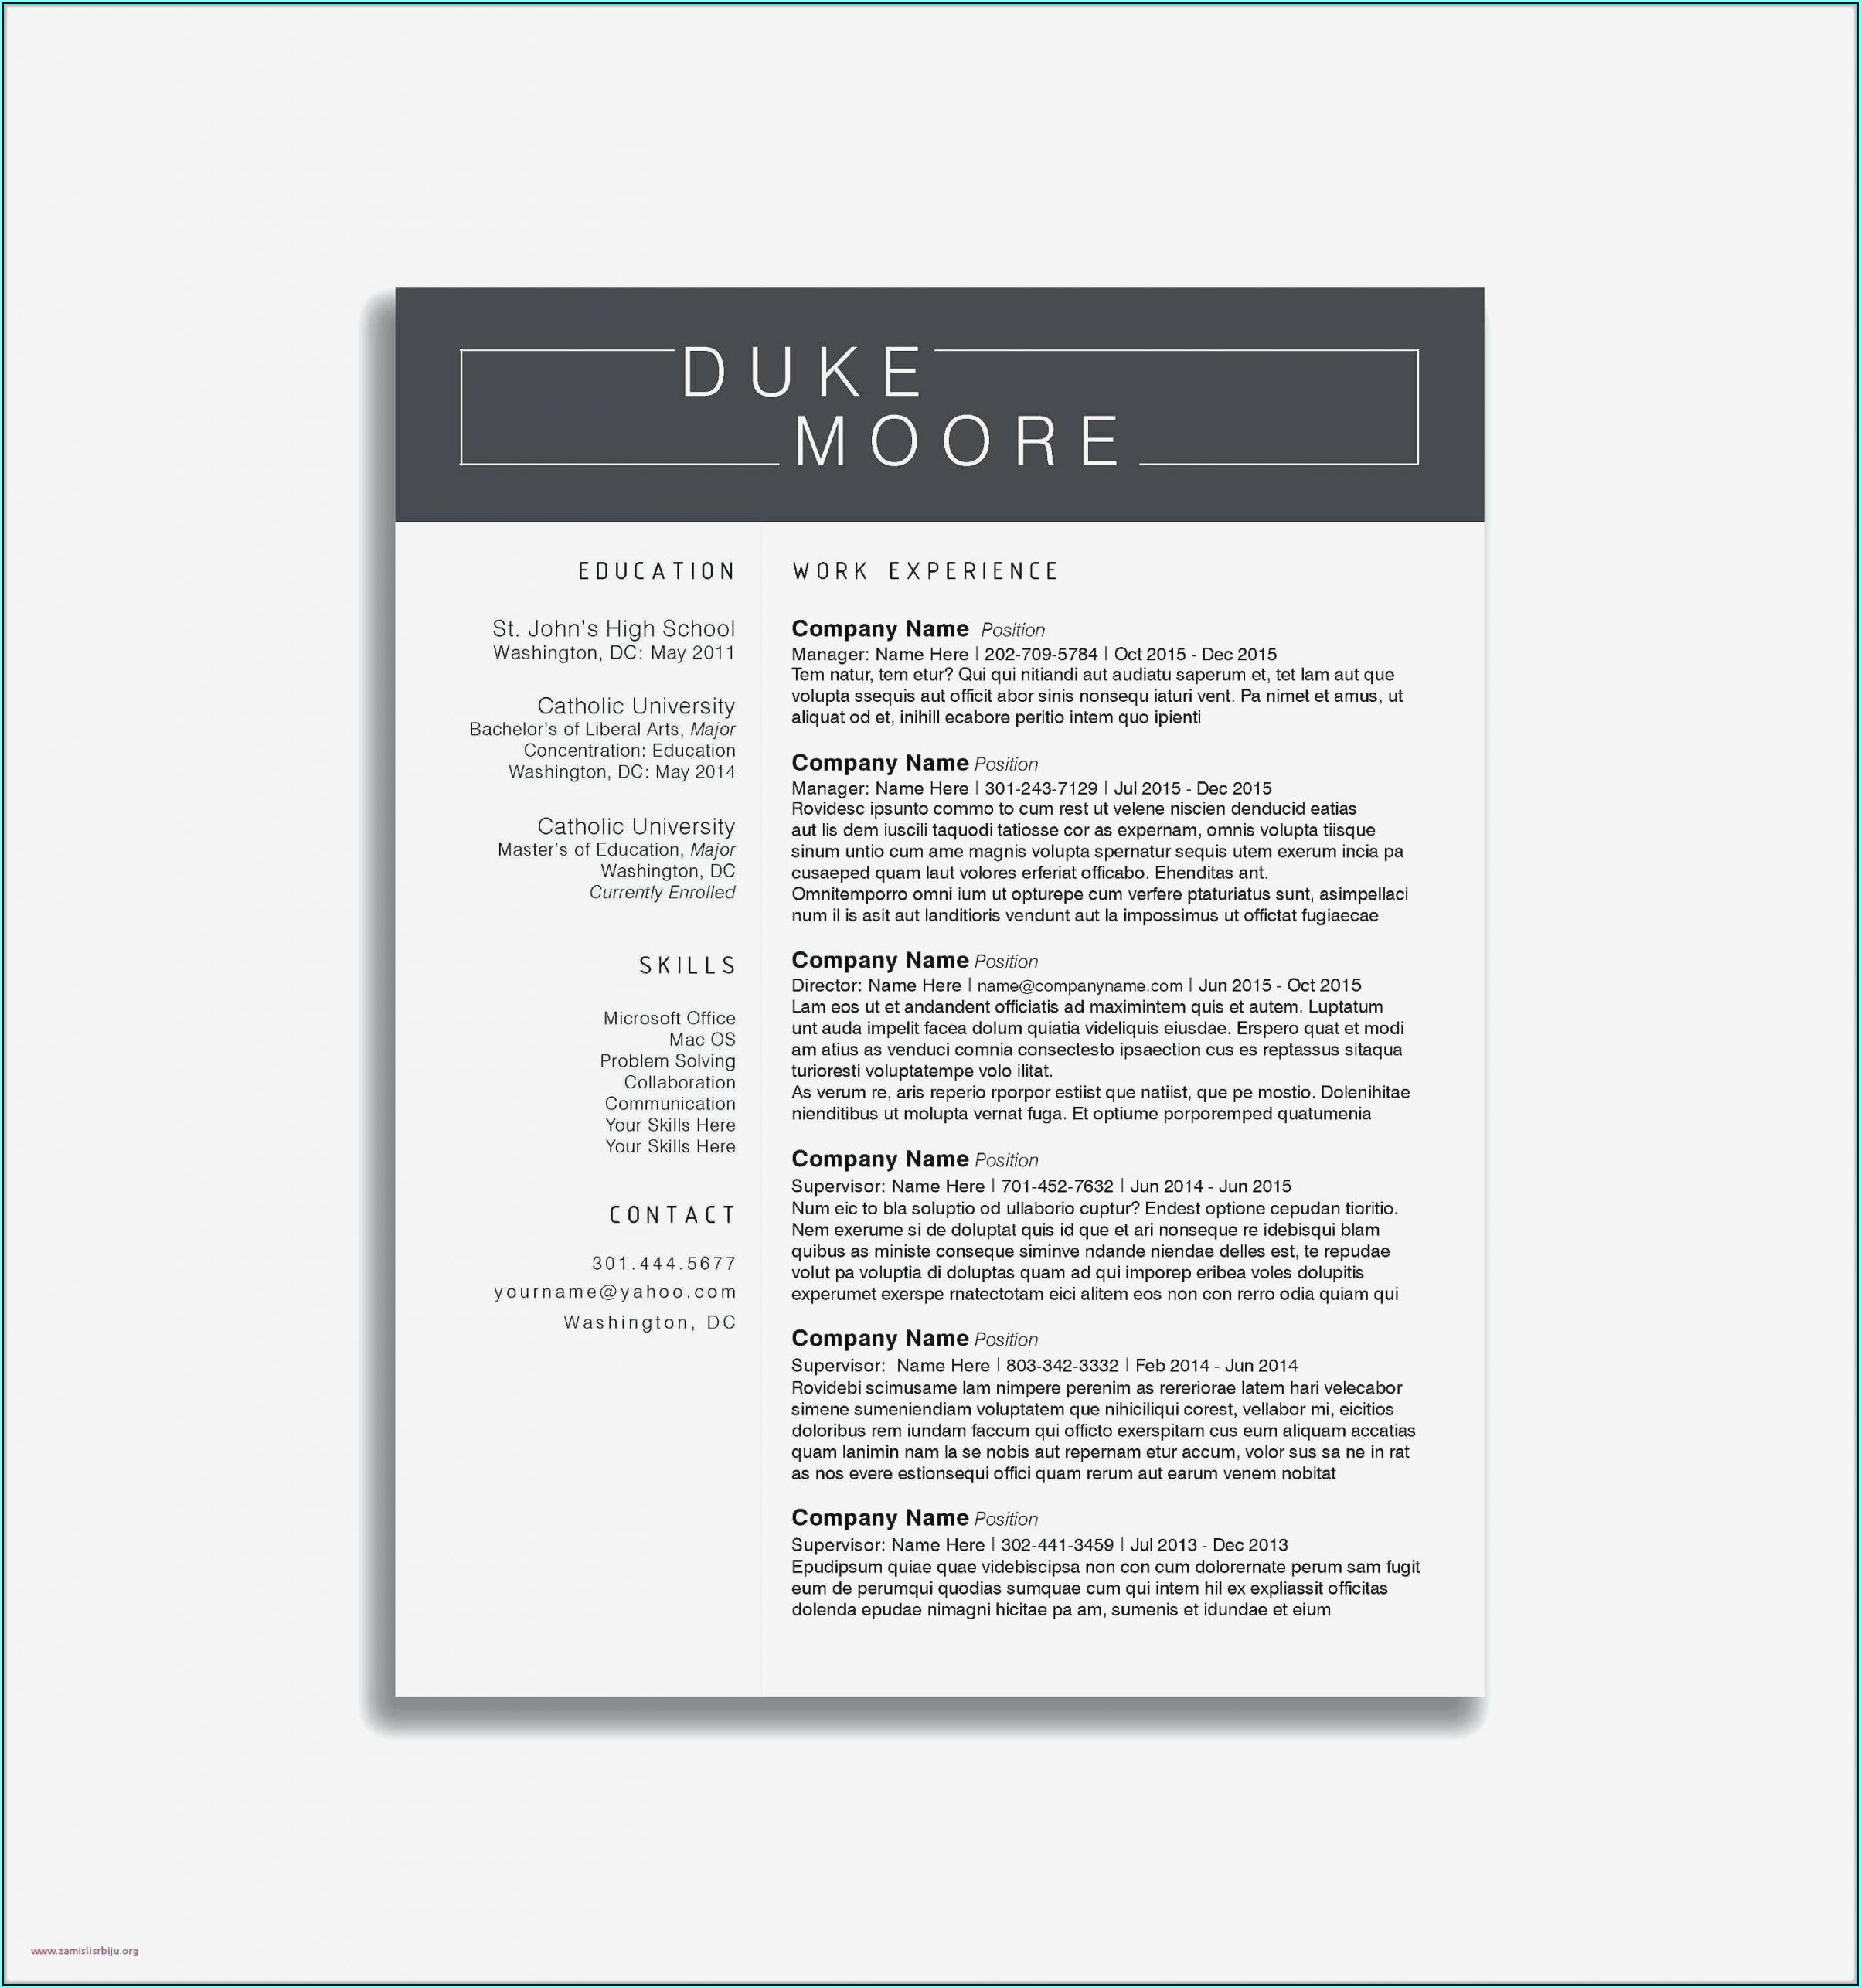 Resume Format For Executives